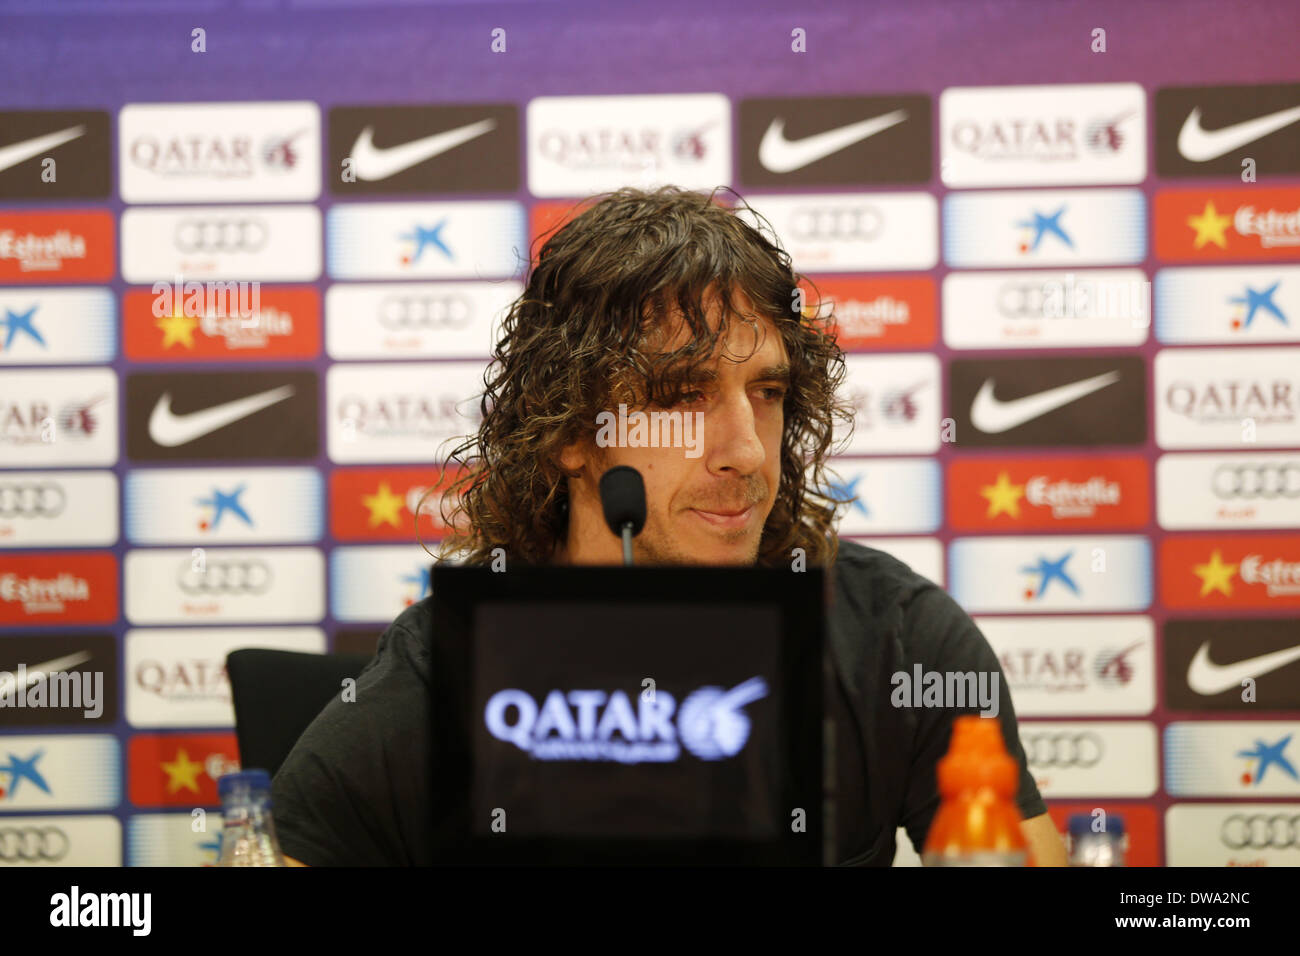 Barcelona, Spain. 4th Mar, 2014. Carles Puyol during a press conference announcing his retirement from football at the end of season. Credit:  Joan Valls/NurPhoto/ZUMAPRESS.com/Alamy Live News Stock Photo